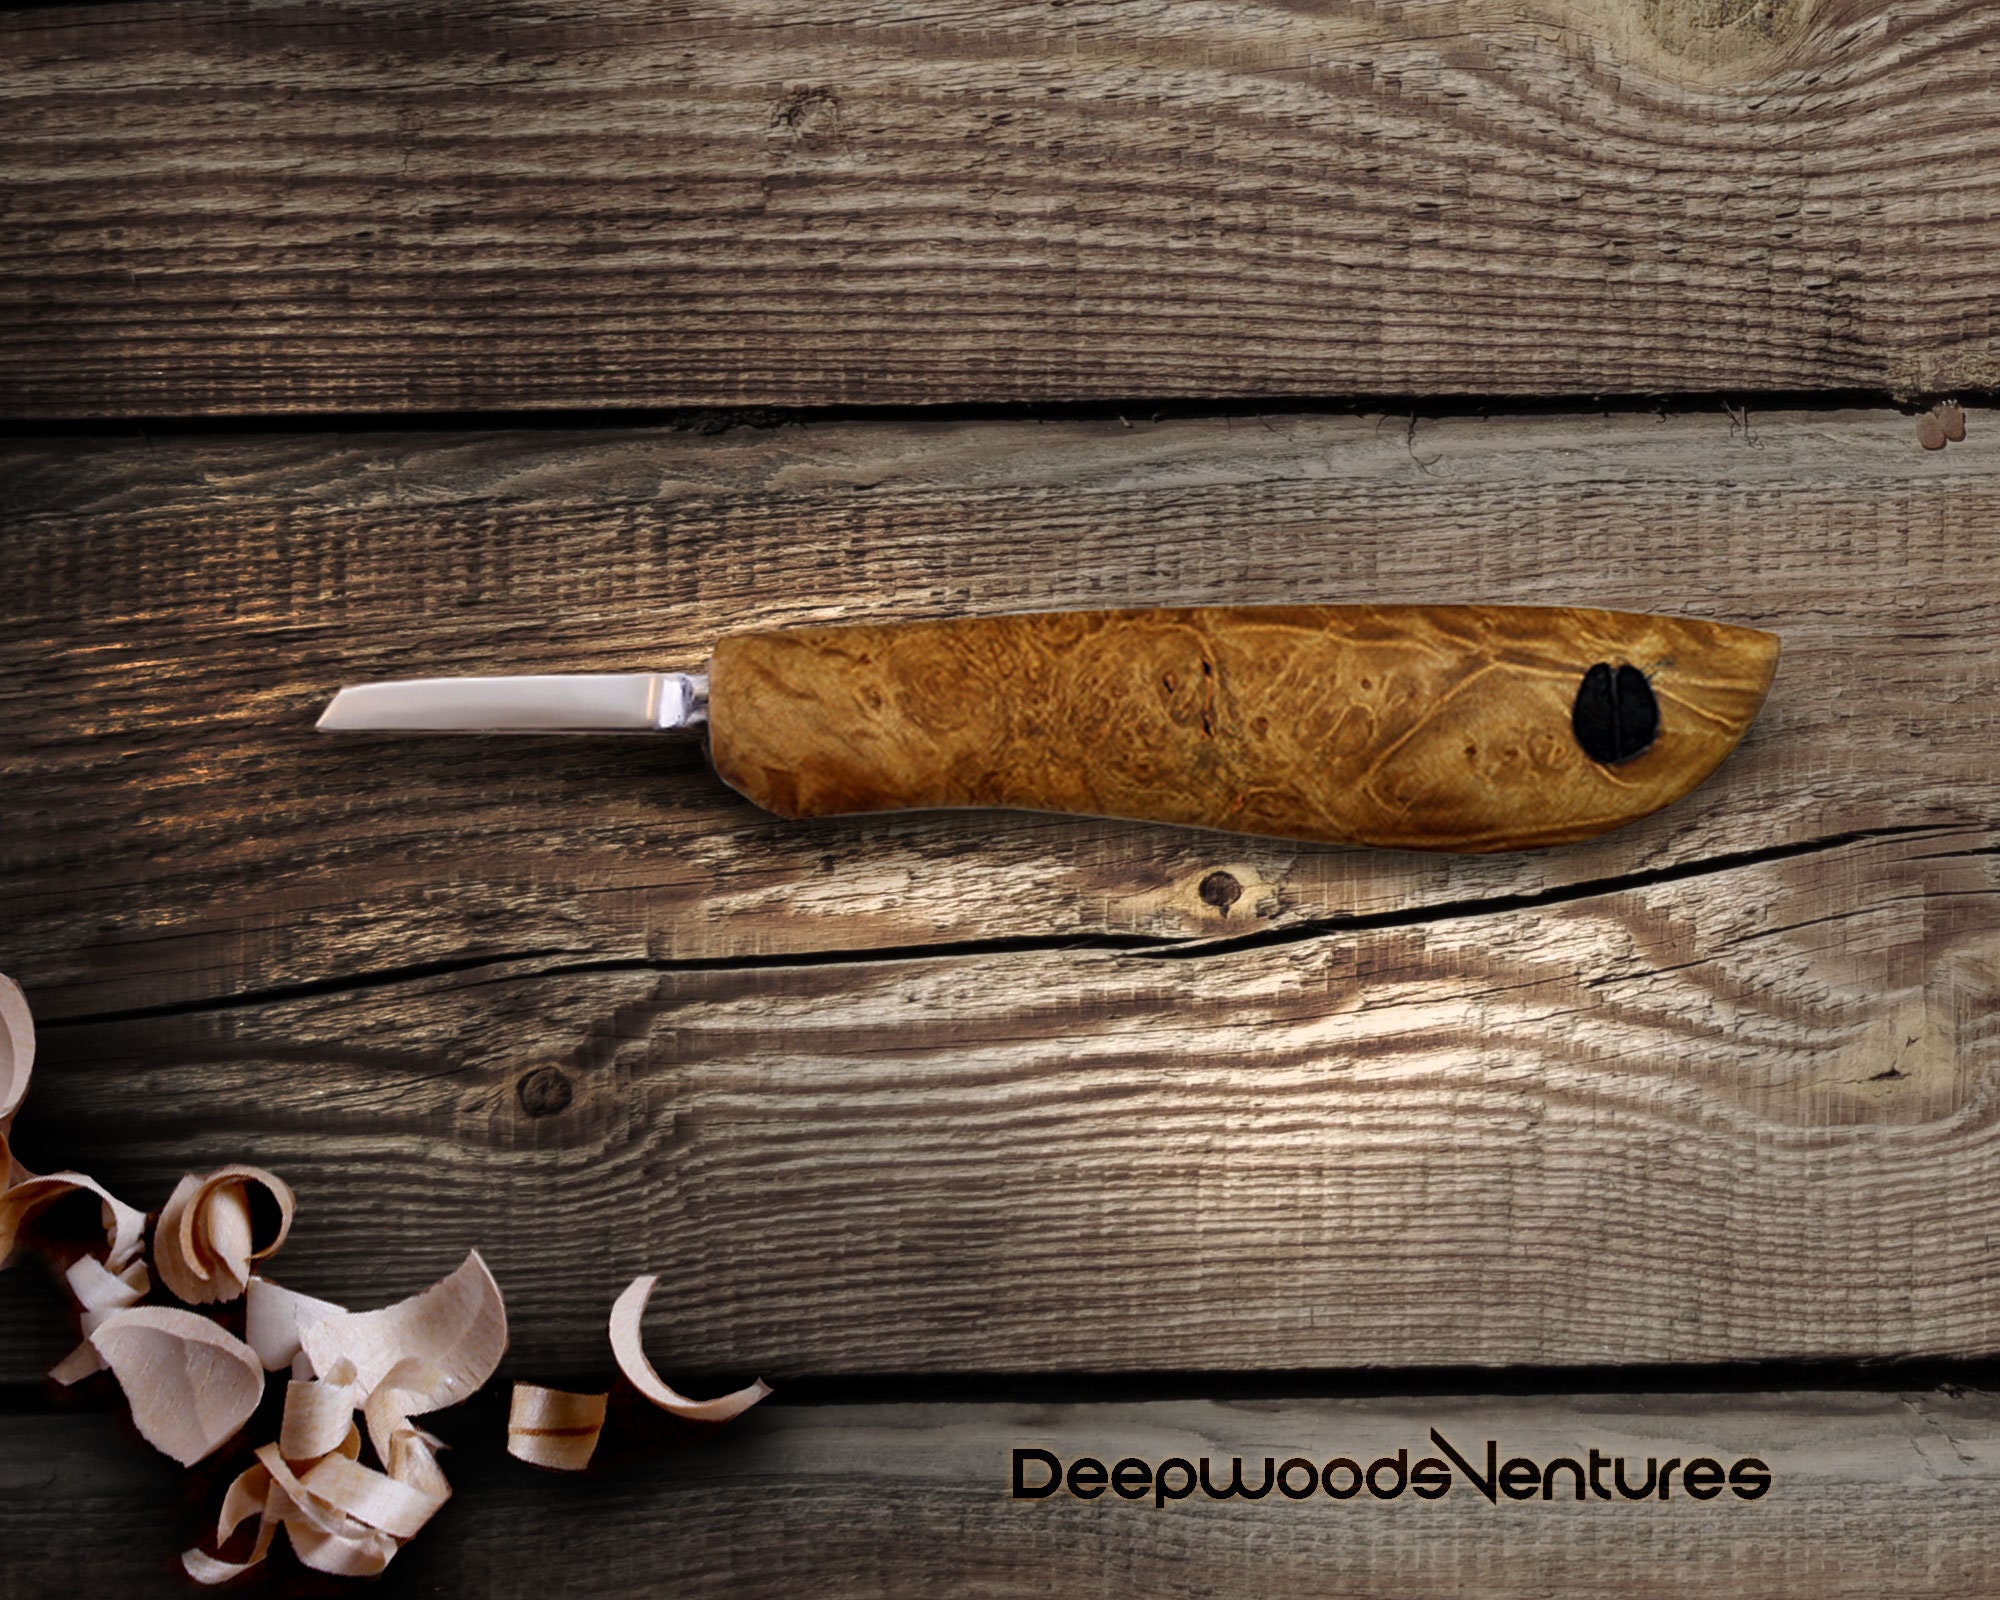 Carving Knife, Whittling Knife, Wood Carving Knife With a Leather